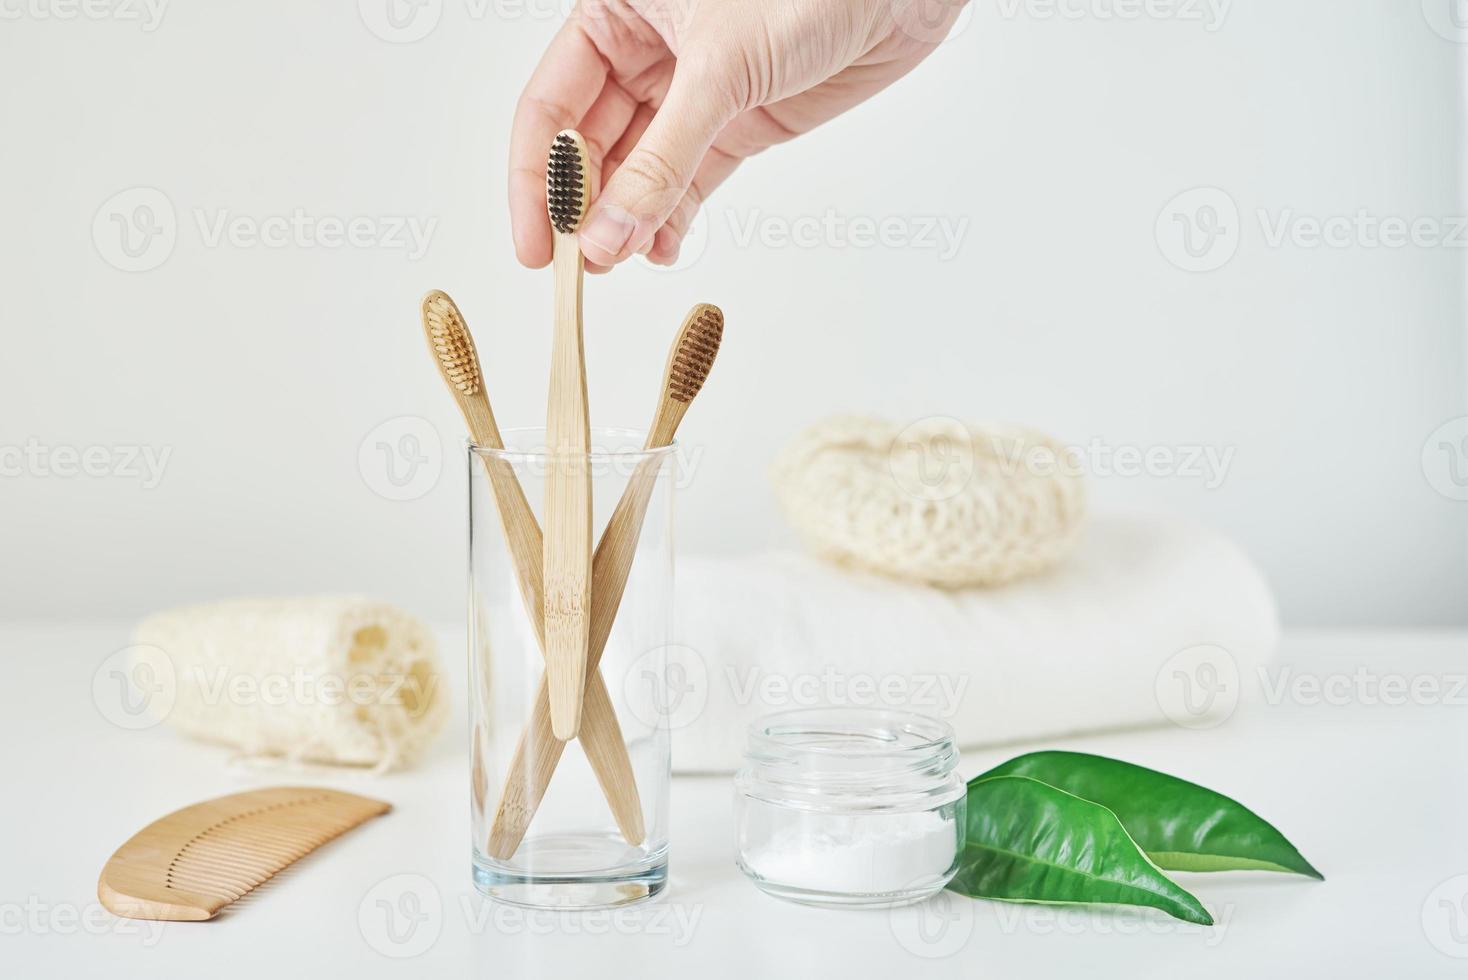 Woman hand take wooden bamboo toothbrush in a bathroom interior photo